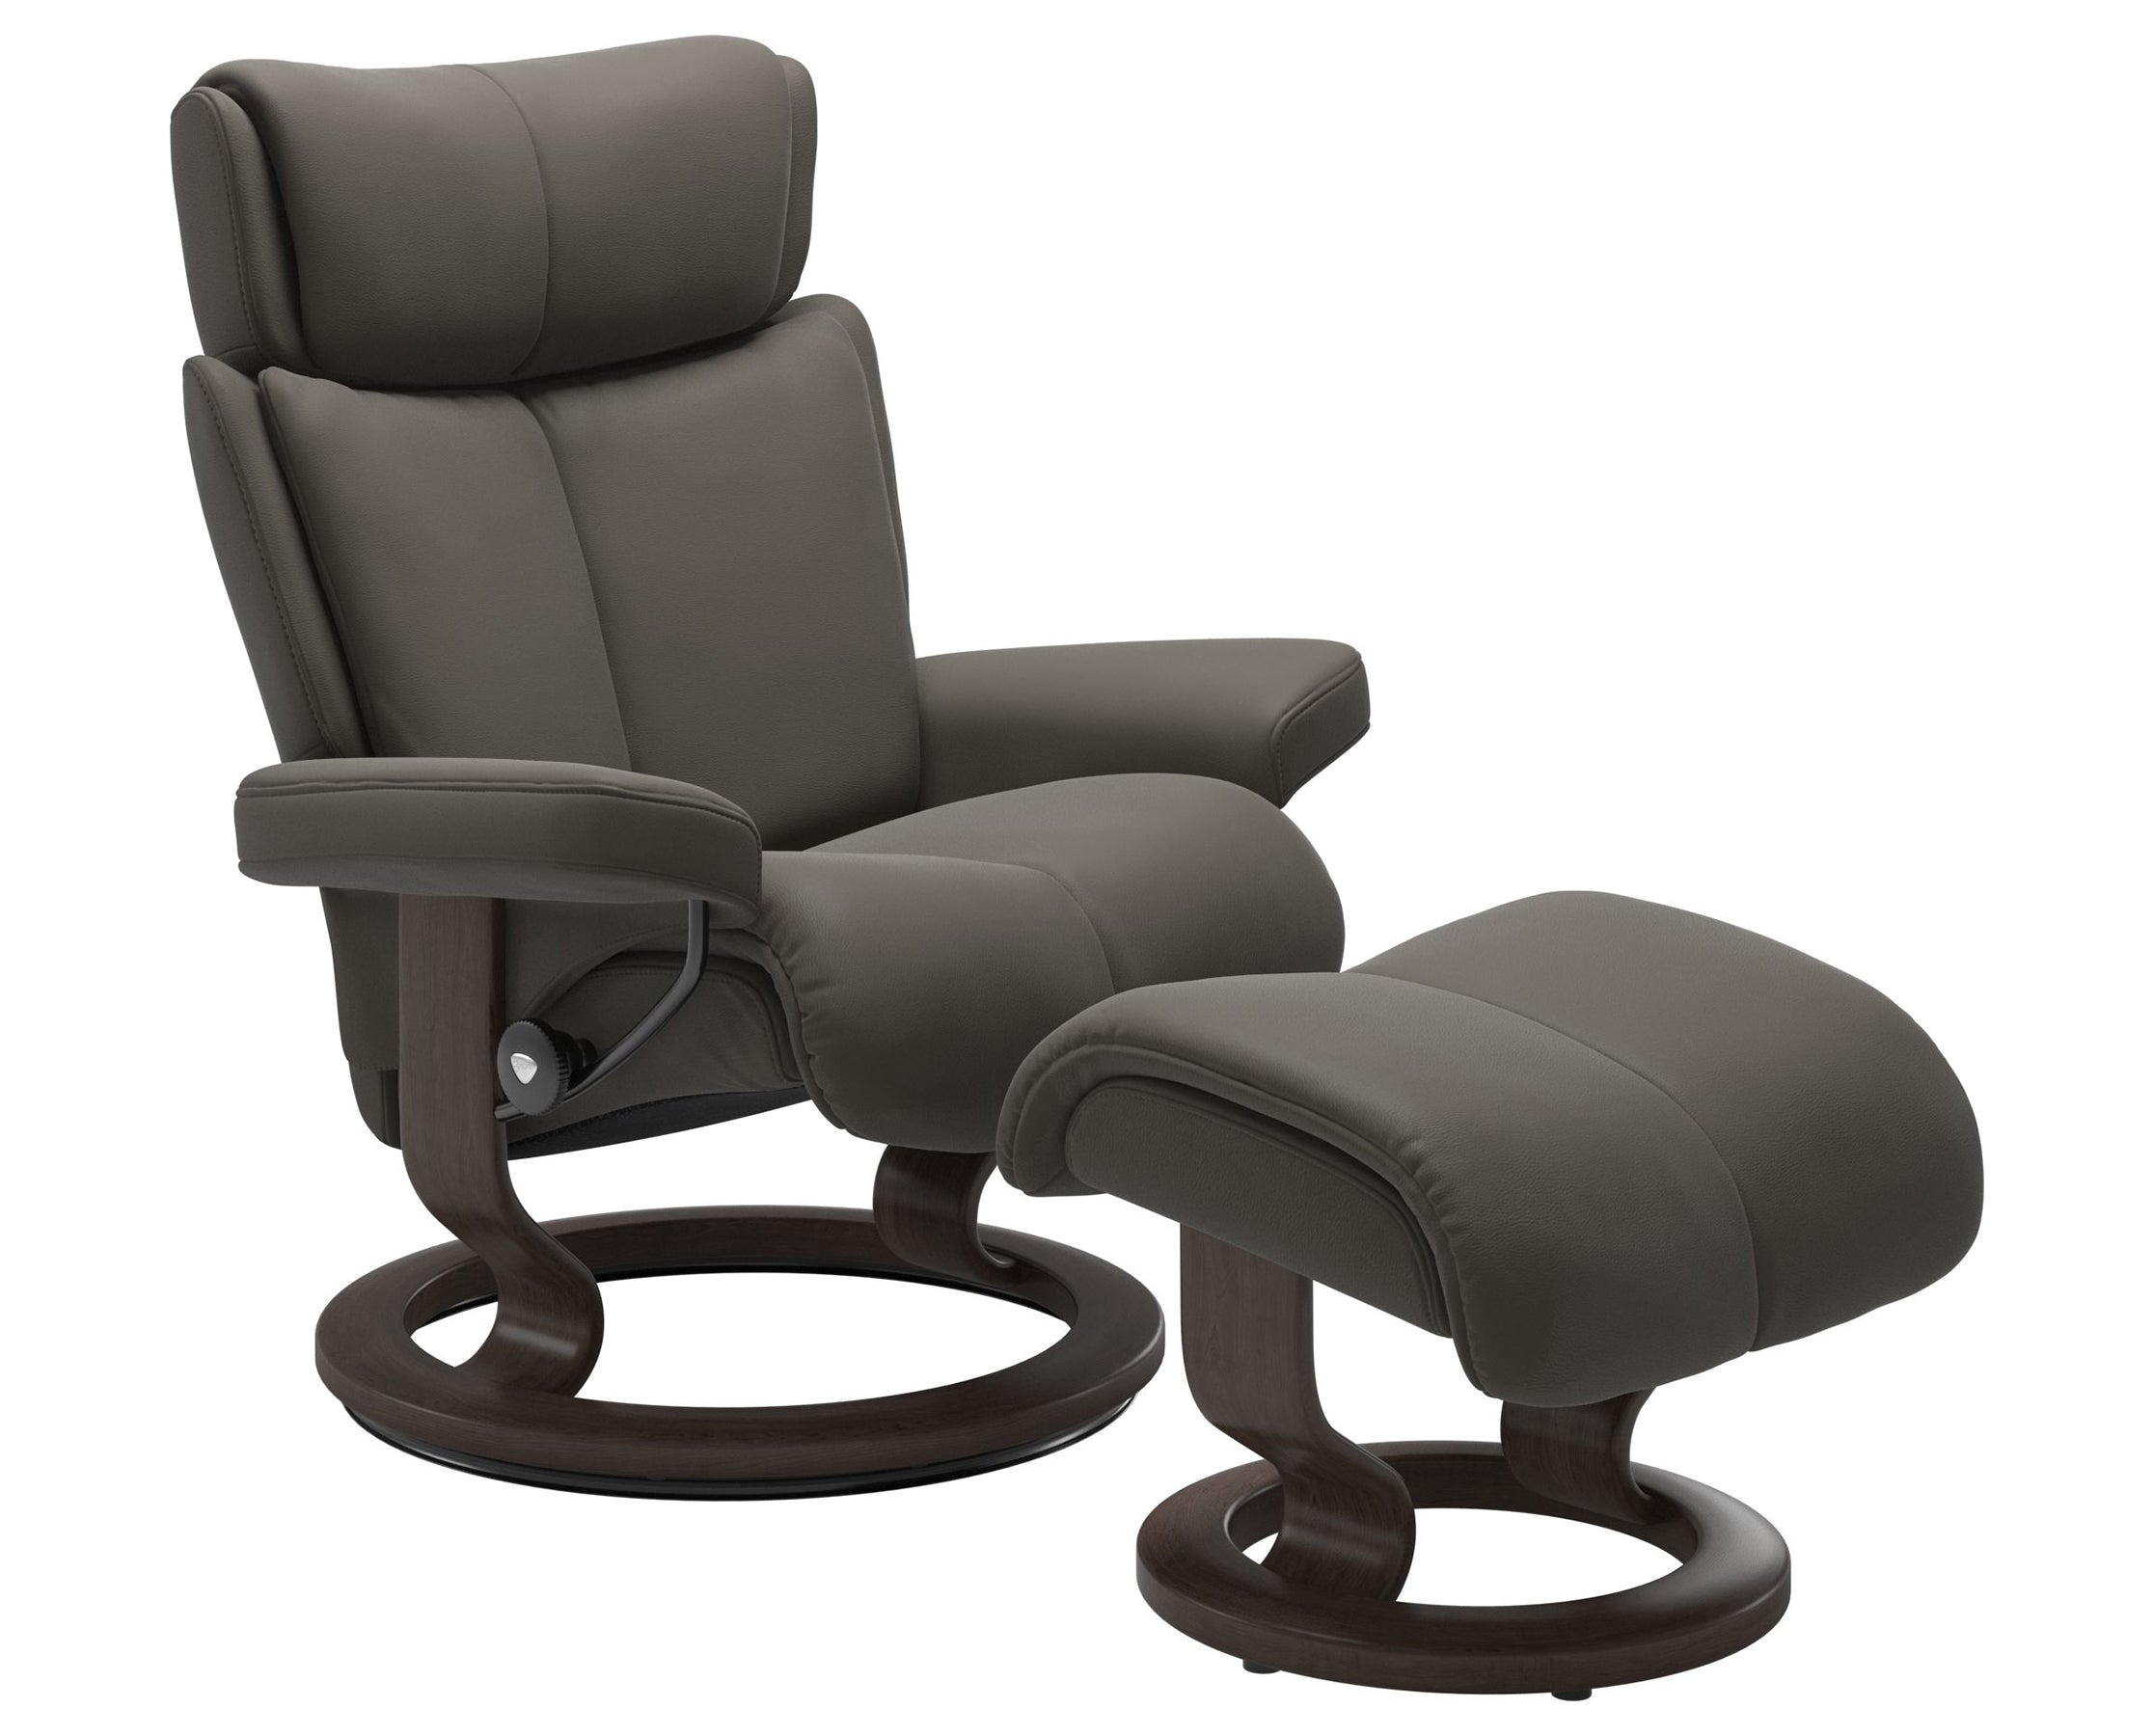 Paloma Leather Metal Grey S/M/L and Wenge Base | Stressless Magic Classic Recliner | Valley Ridge Furniture